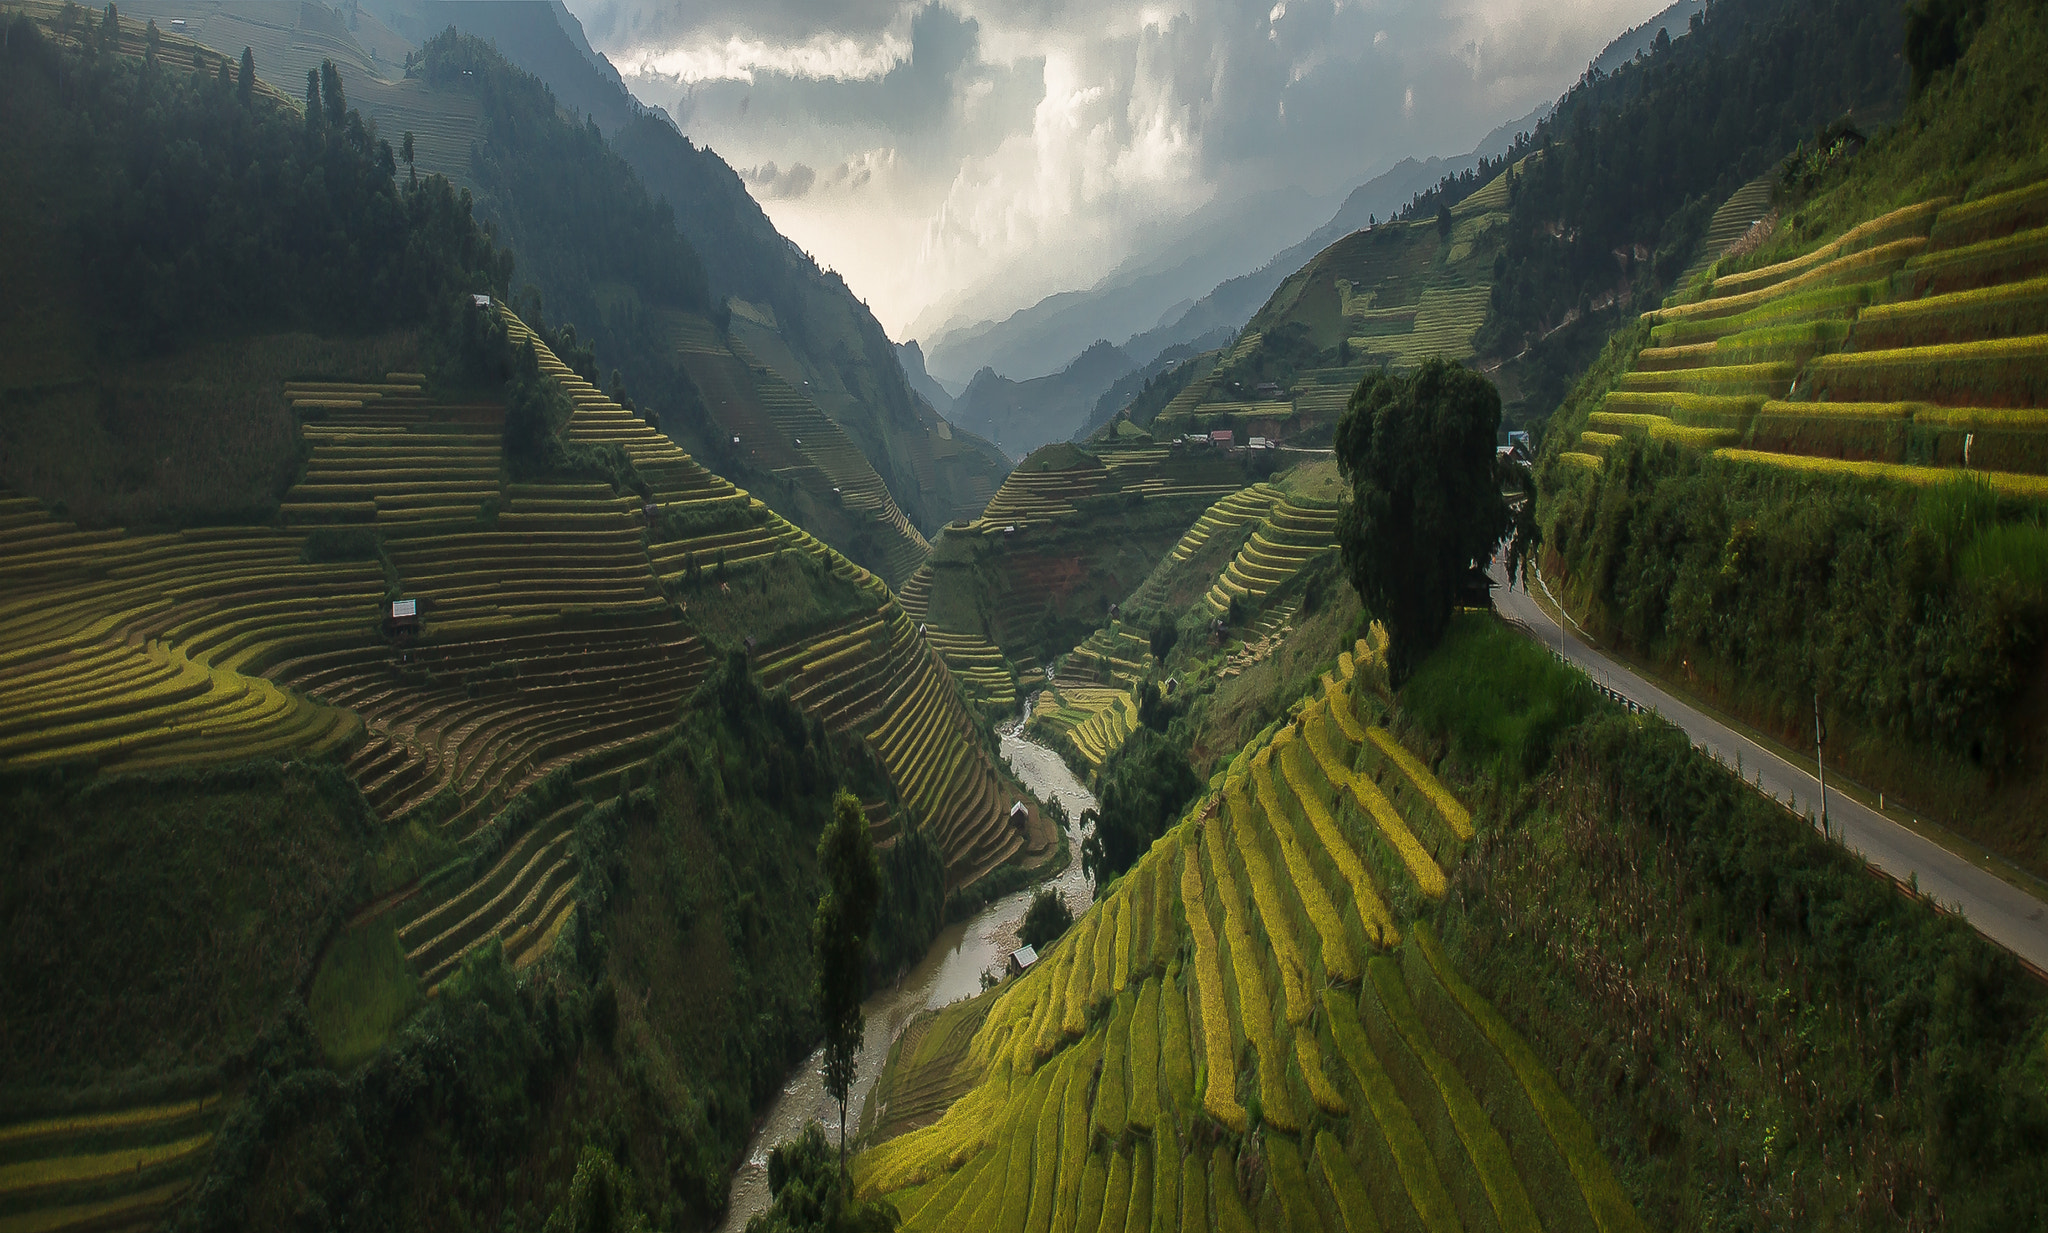 Northwest Discovery Travel: Mu Cang Chai travel guide 